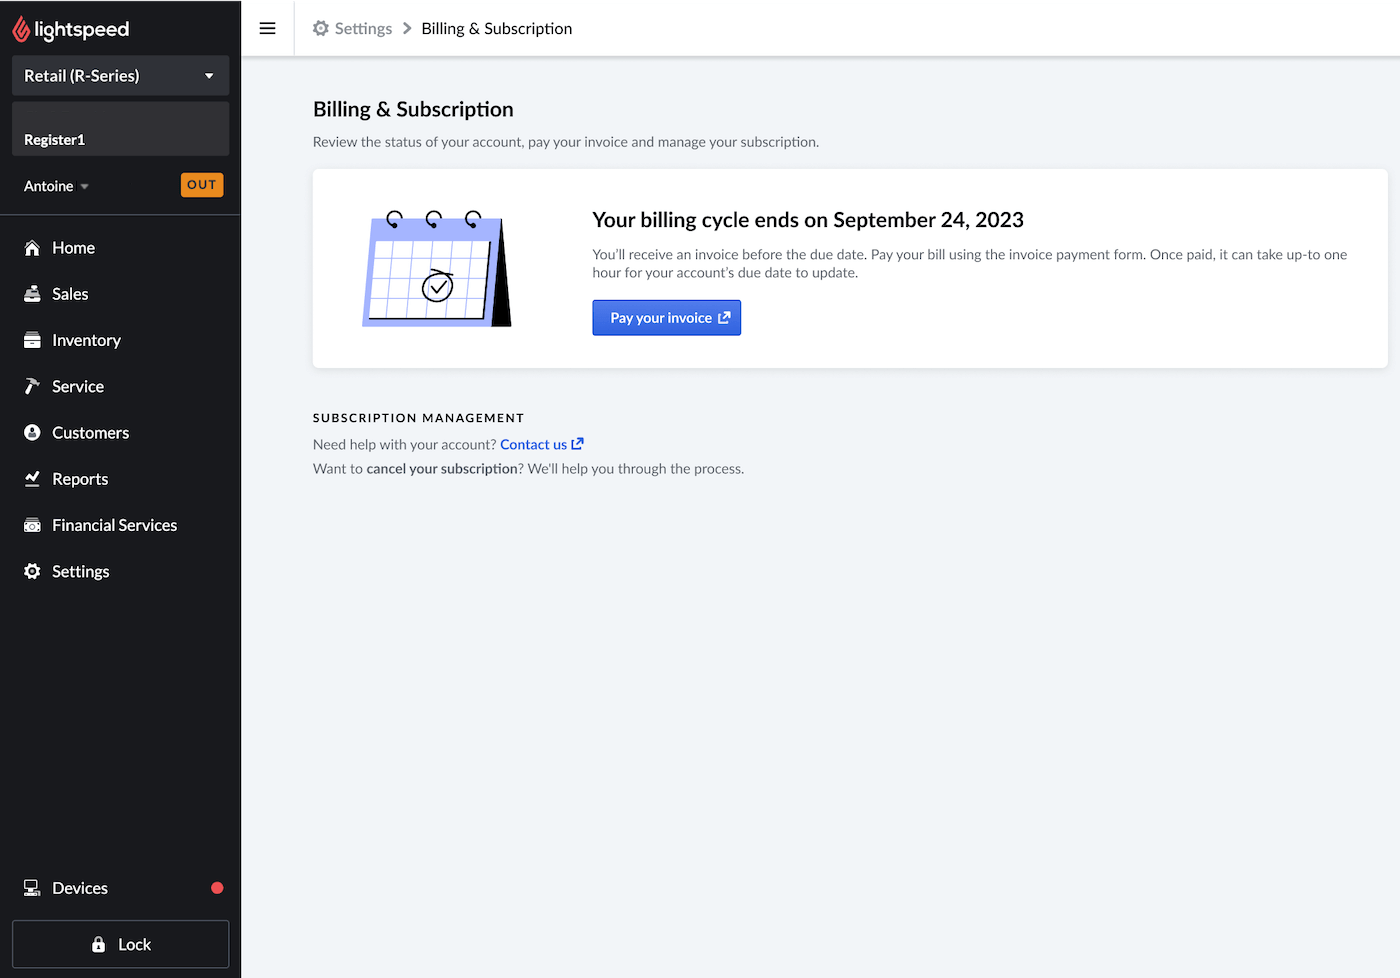 Billing and subscription page with banner indicating when your billing cycle ends.